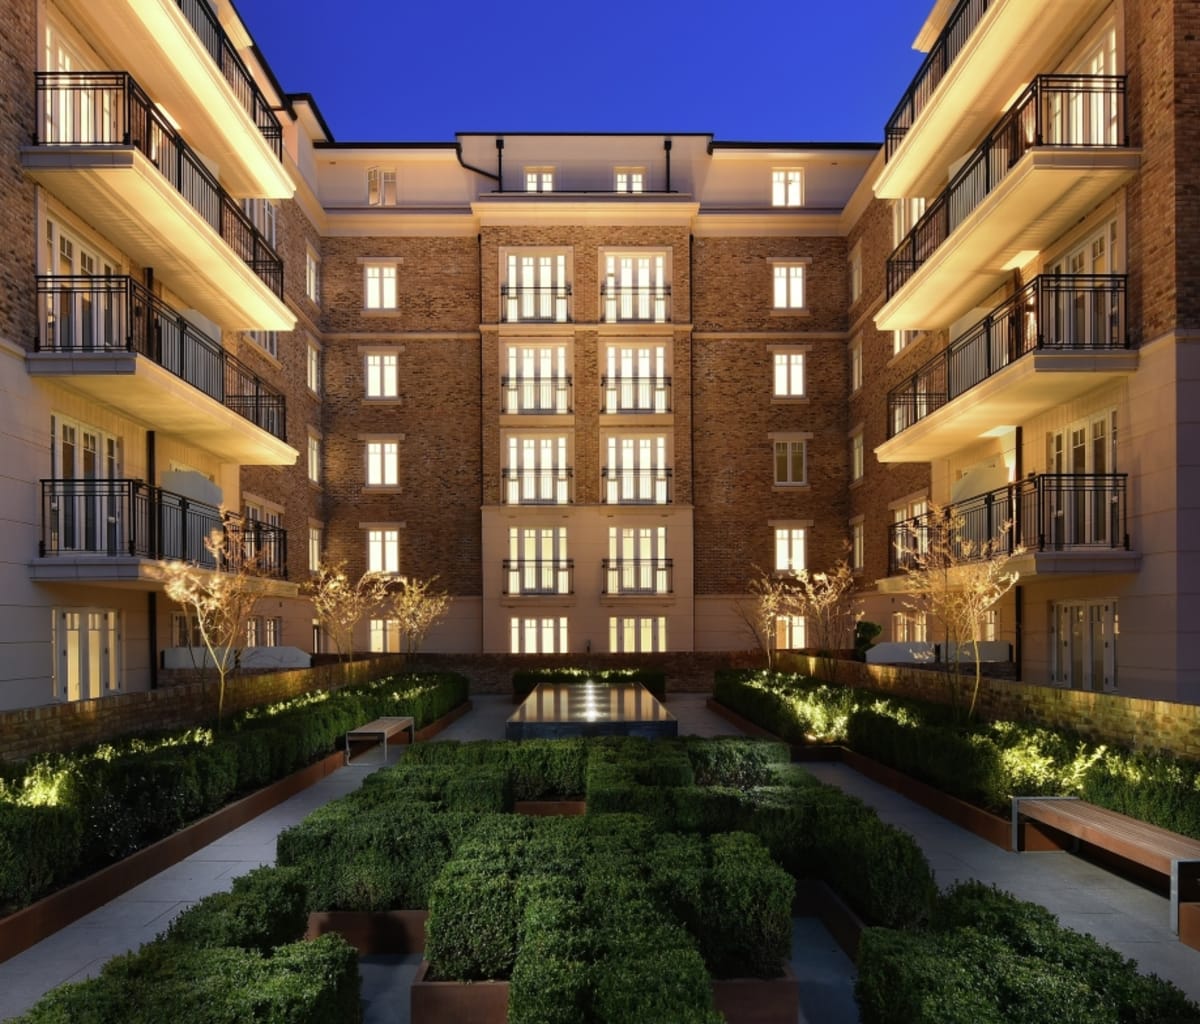 Nighttime view of cast stone detailed apartments overlooking a landscaped garden